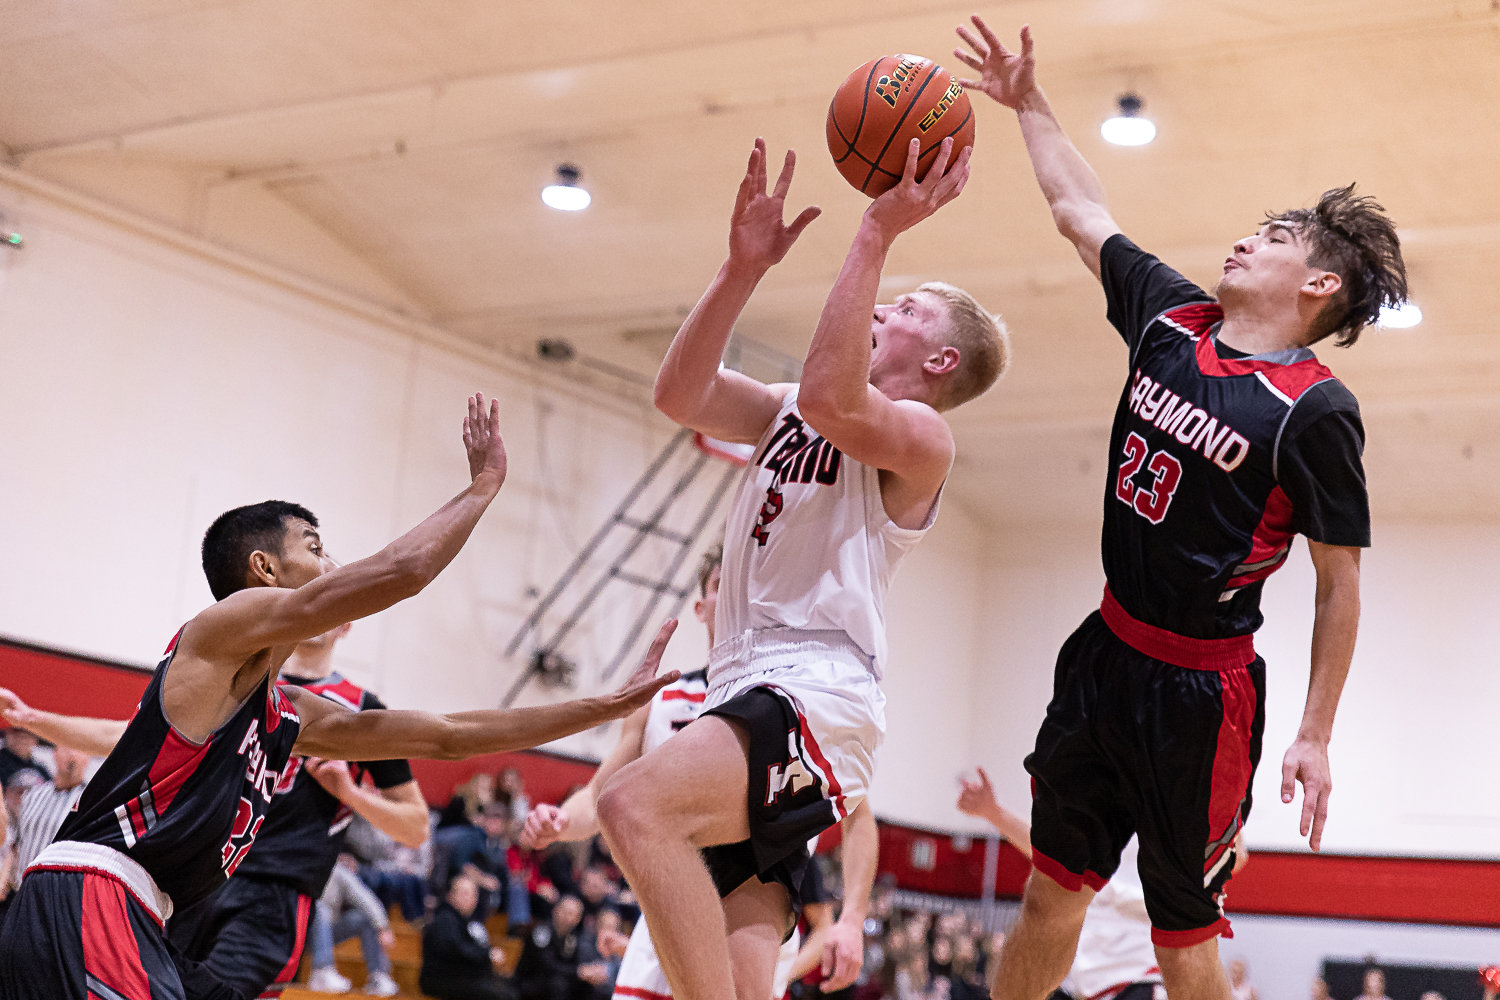 Tenino forward Austin Gonia drives for a layup, contested by Raymond's Iyven Perez Nov. 30.